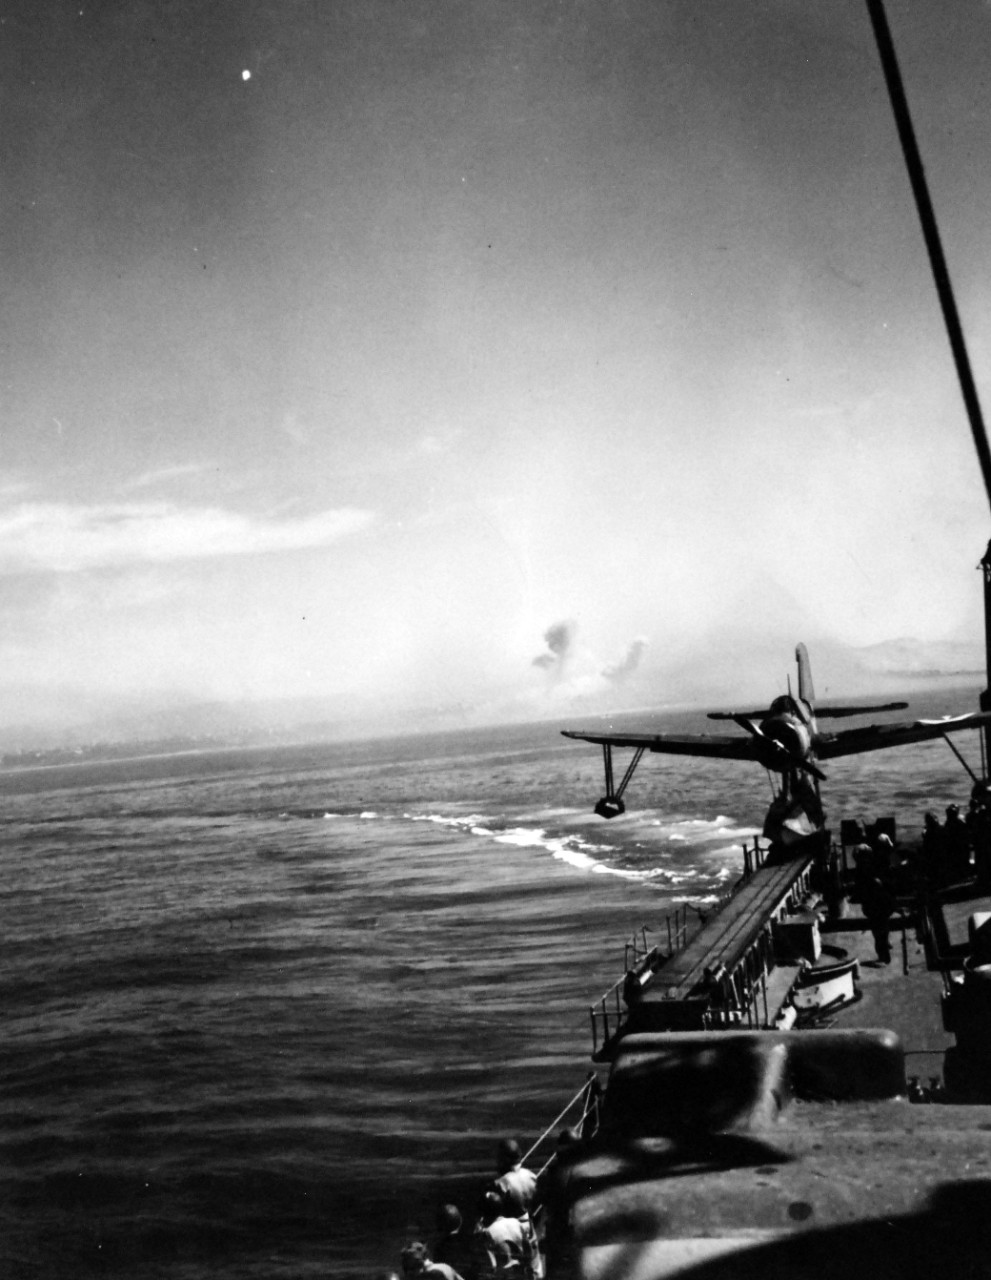 80-G-74832:   Operation Husky, July-August 1943.   Bombing of the coast of Gela, Sicily, by the Germans, as seen from the deck of USS Boise (CL-47).  Note the OS2U on the catapult.    Photographed by USS Boise (CL-47), July 10 1943.    Official U.S. Navy Photograph, now in the collections of the National Archives.  (2018/02/14).    